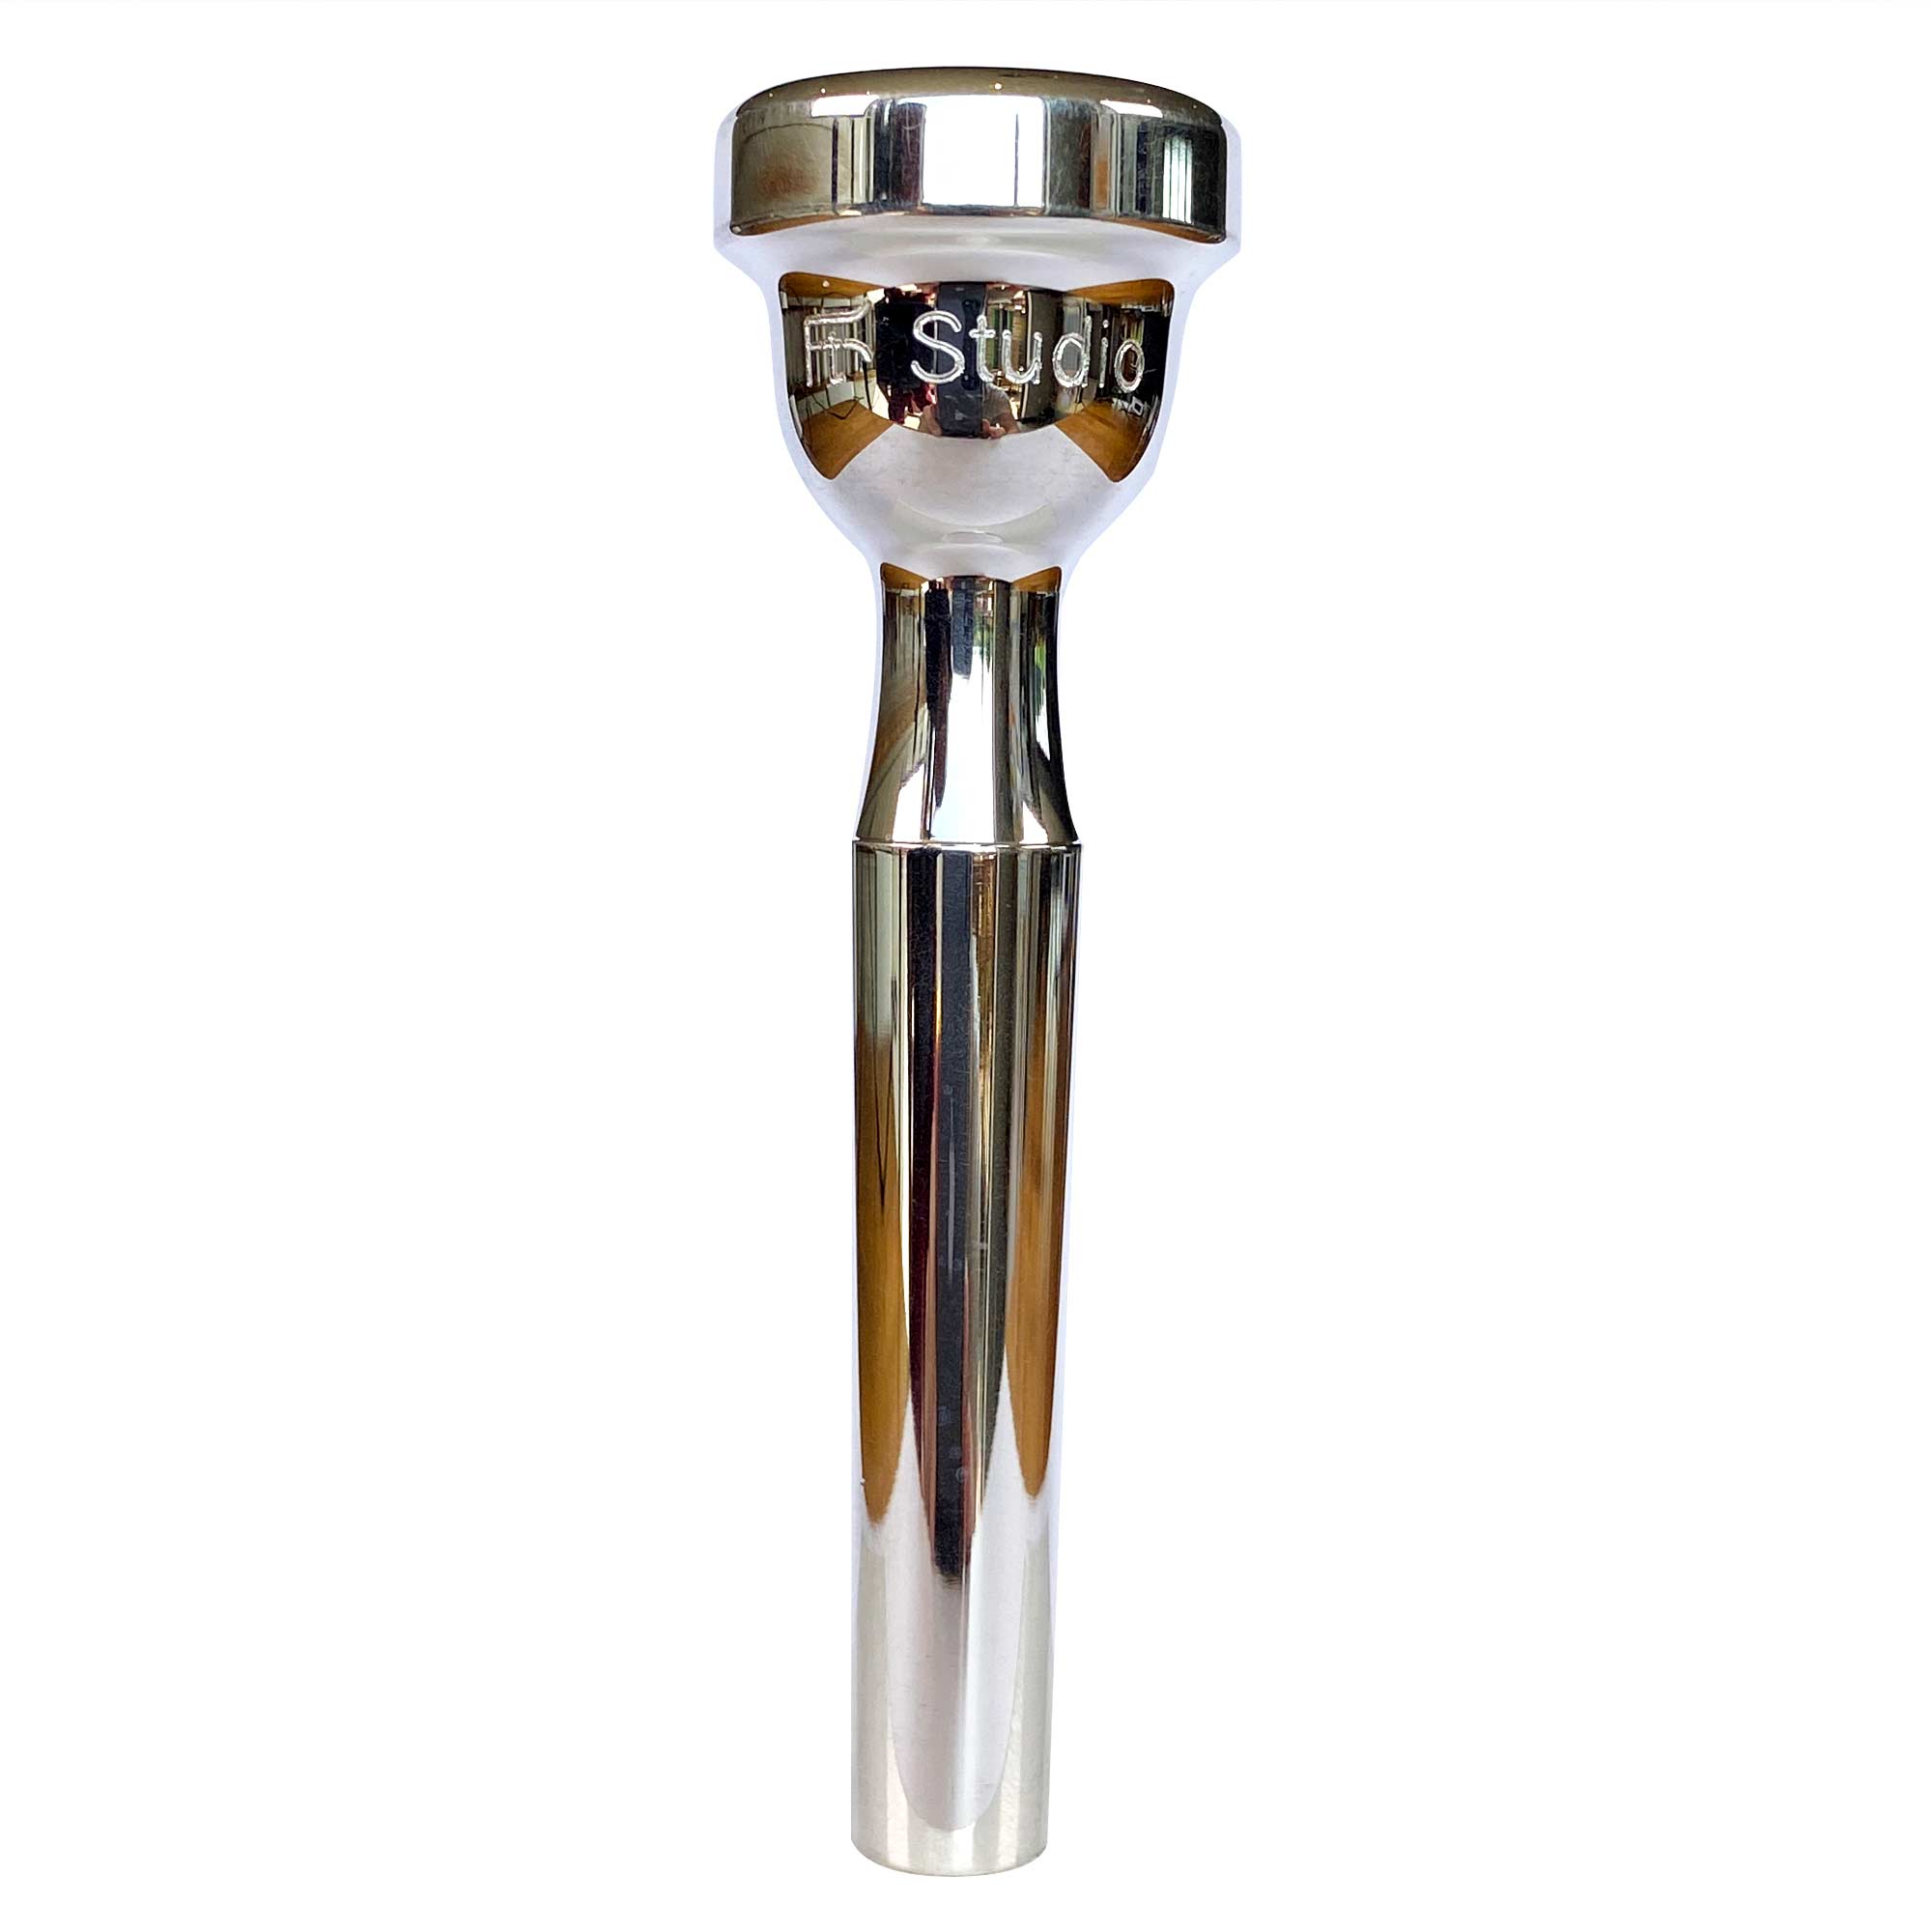 Fultone Brass - Ft Series Mouthpieces - Commercial - Studio Mouthpiece